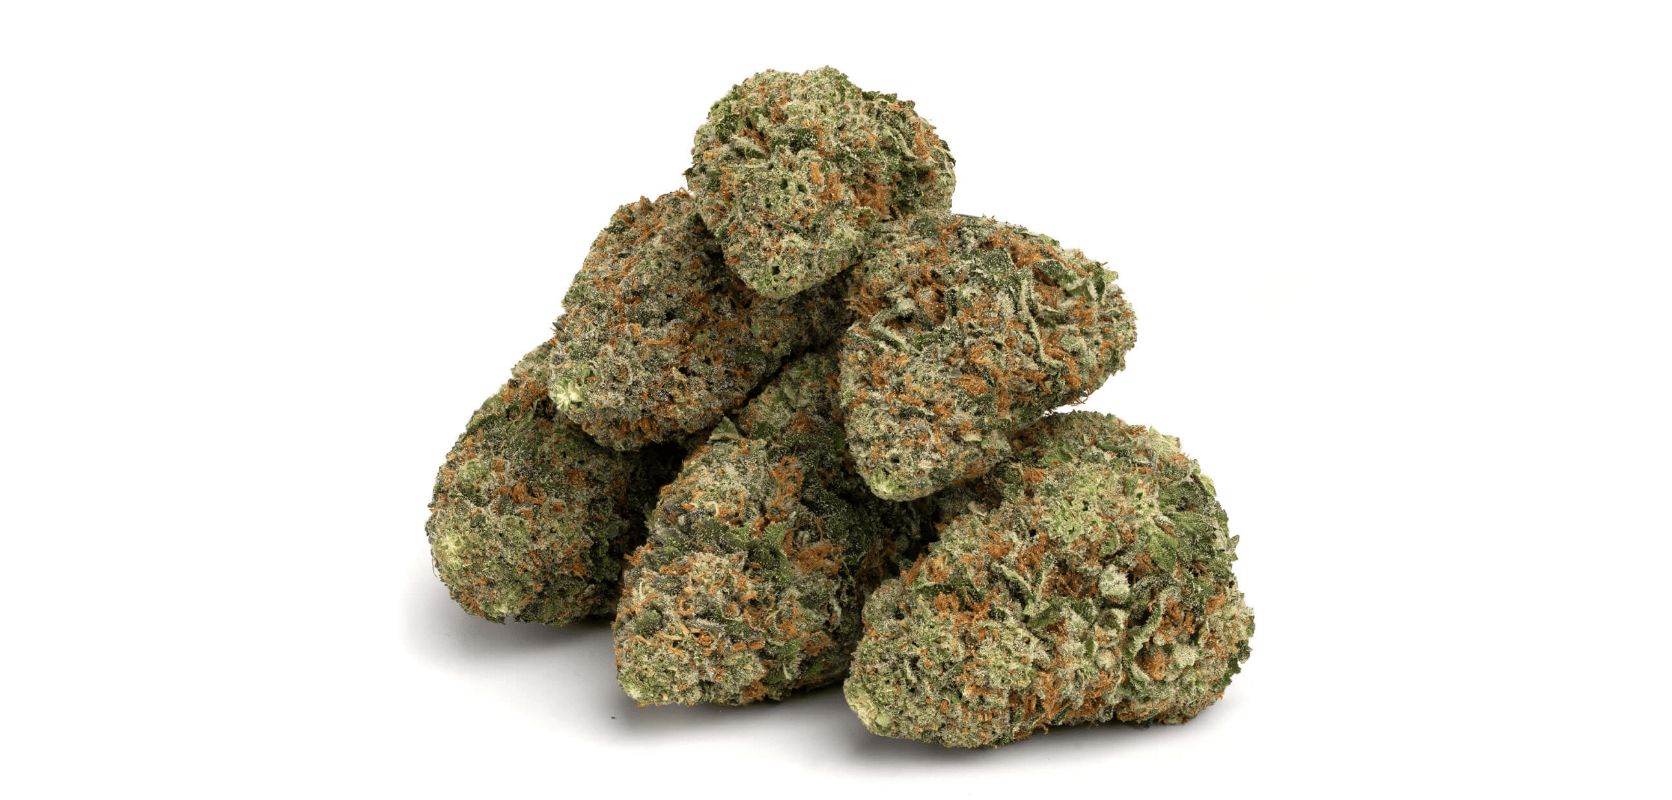 MK Ultra strain is a special bud known for its ability to help with various health concerns.